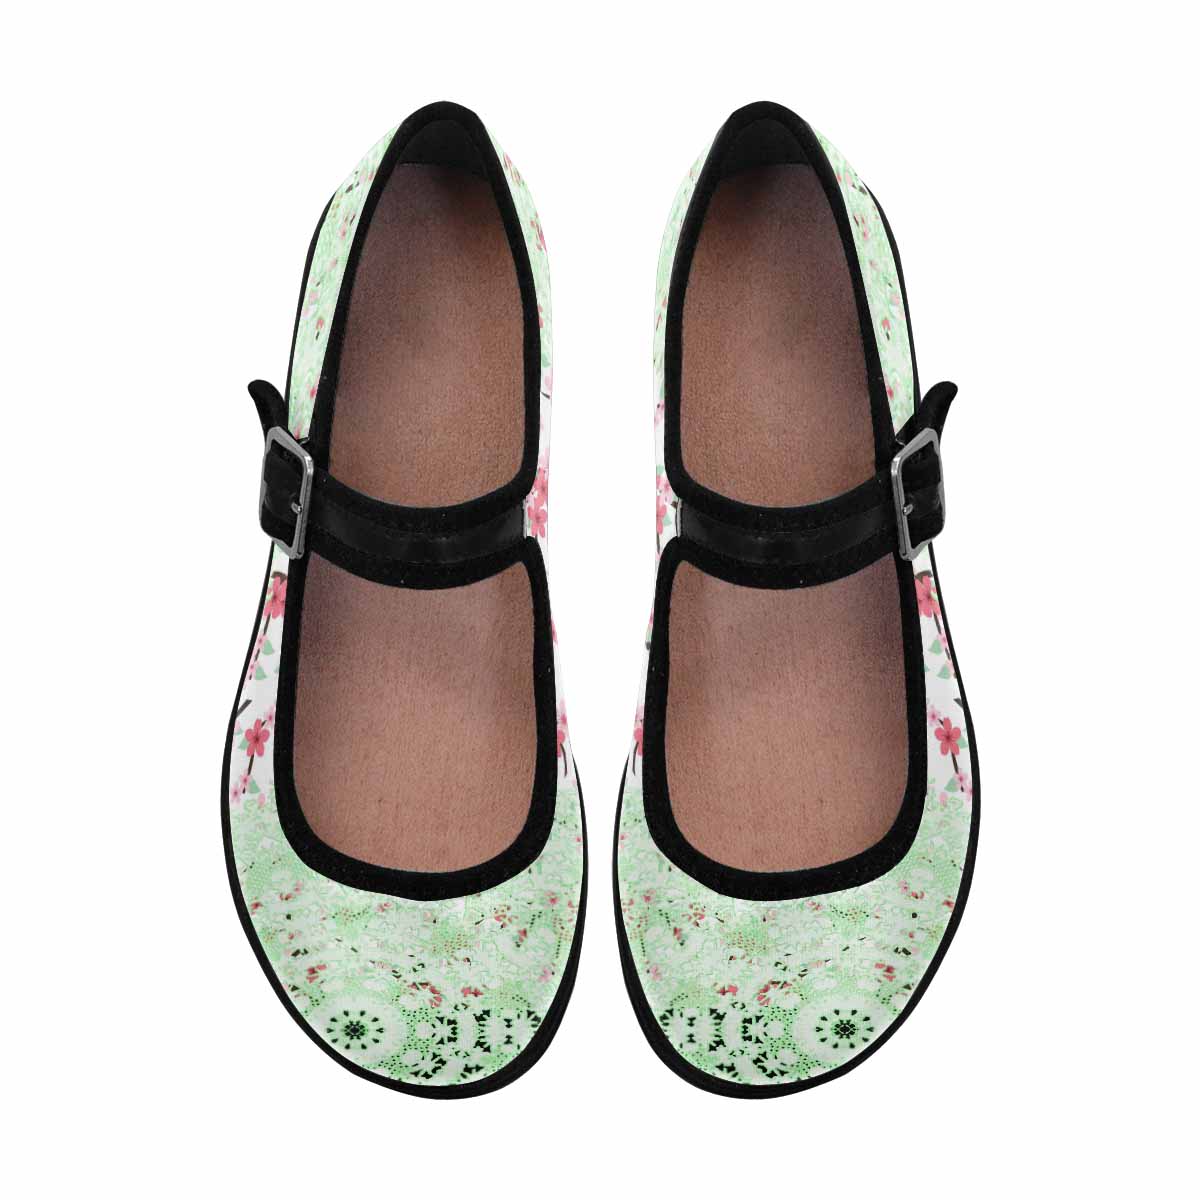 Victorian lace print, cute, vintage style women's Mary Jane shoes, design 10